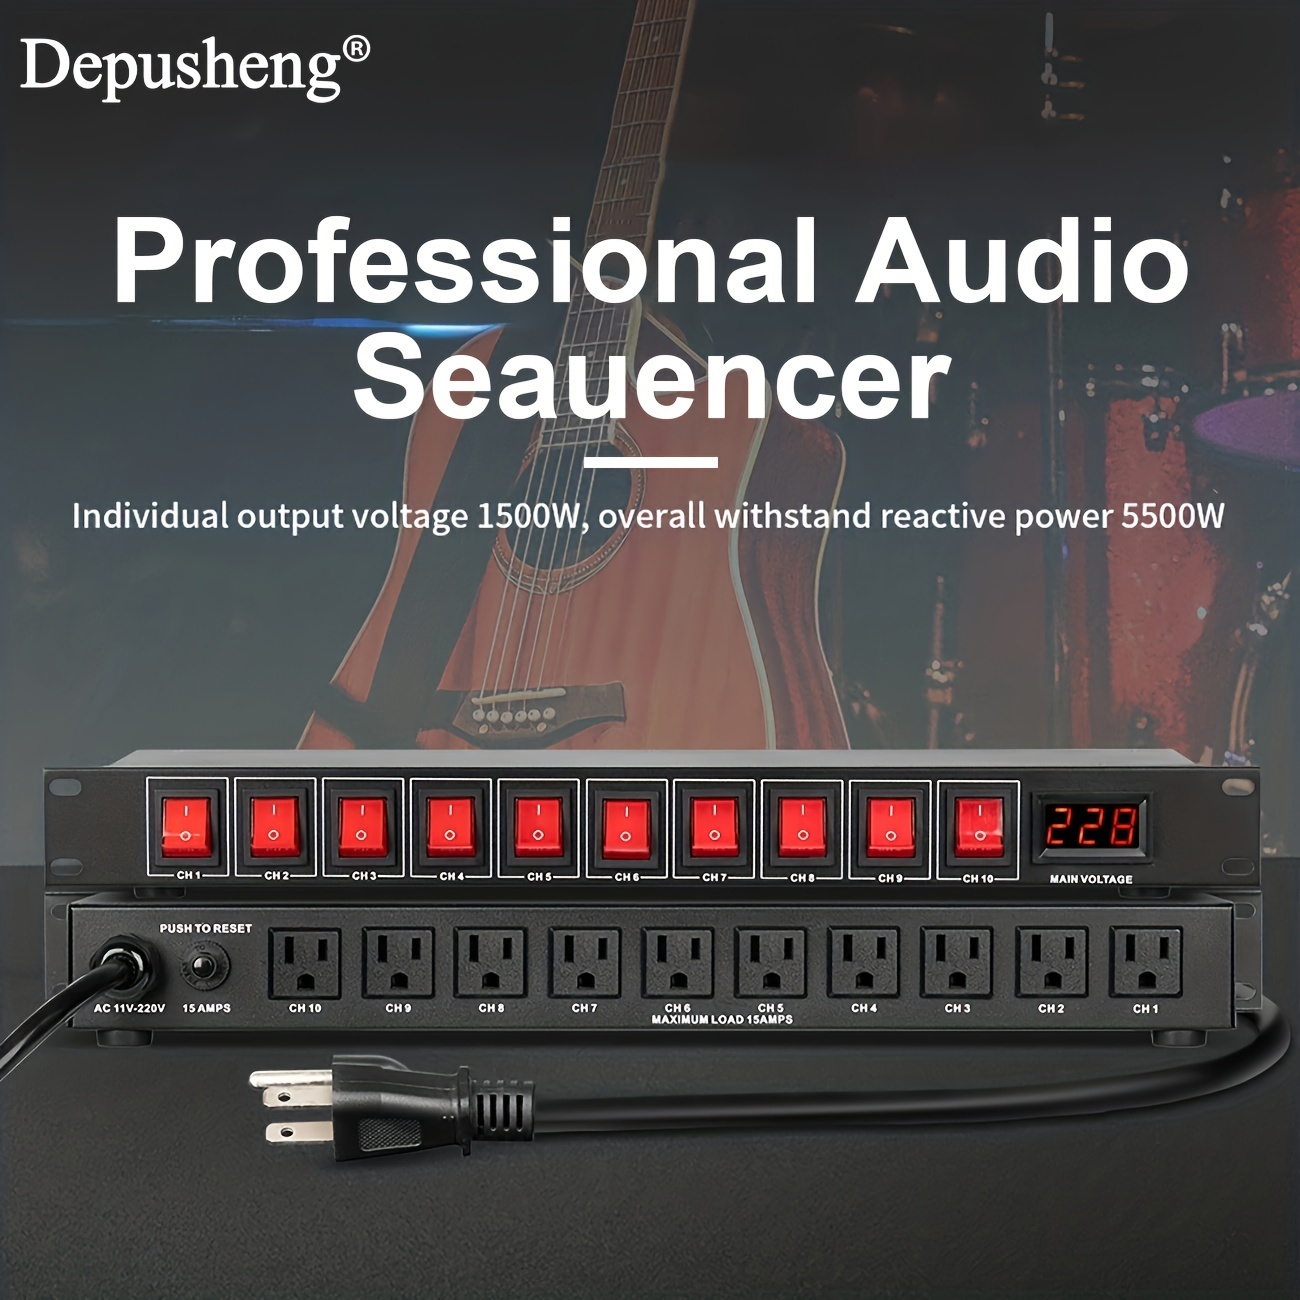 

Depusheng 10 Outlet Power Sequencer Conditioner-10independent Switch Conditioner, 1u Rack Audio Digital Power Supply Controller Regulator W/voltage Readout, Protector.